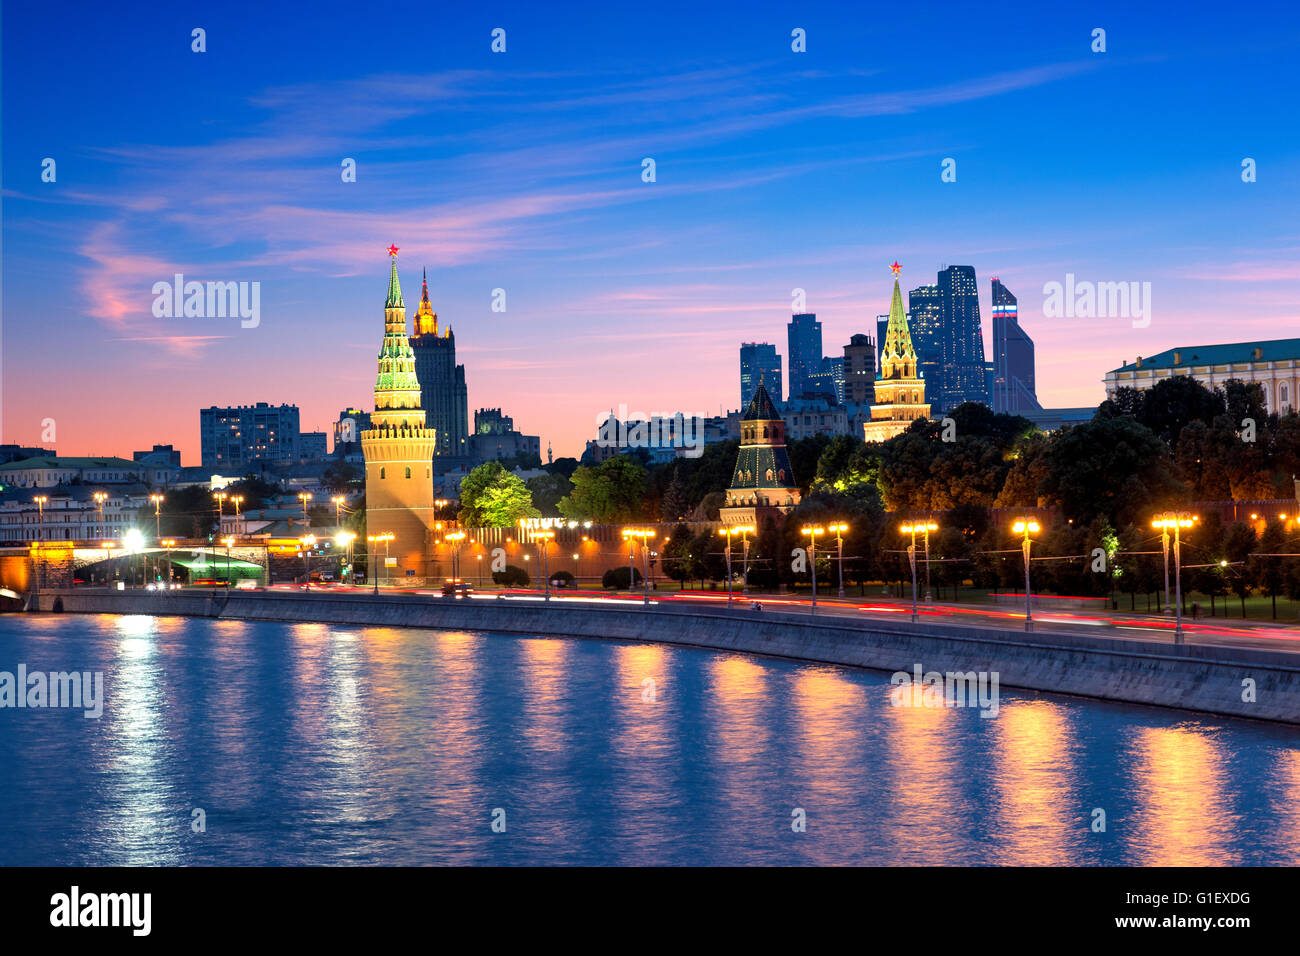 View of Kremlin churches and towers from Moscow River Bridge Stock Photo